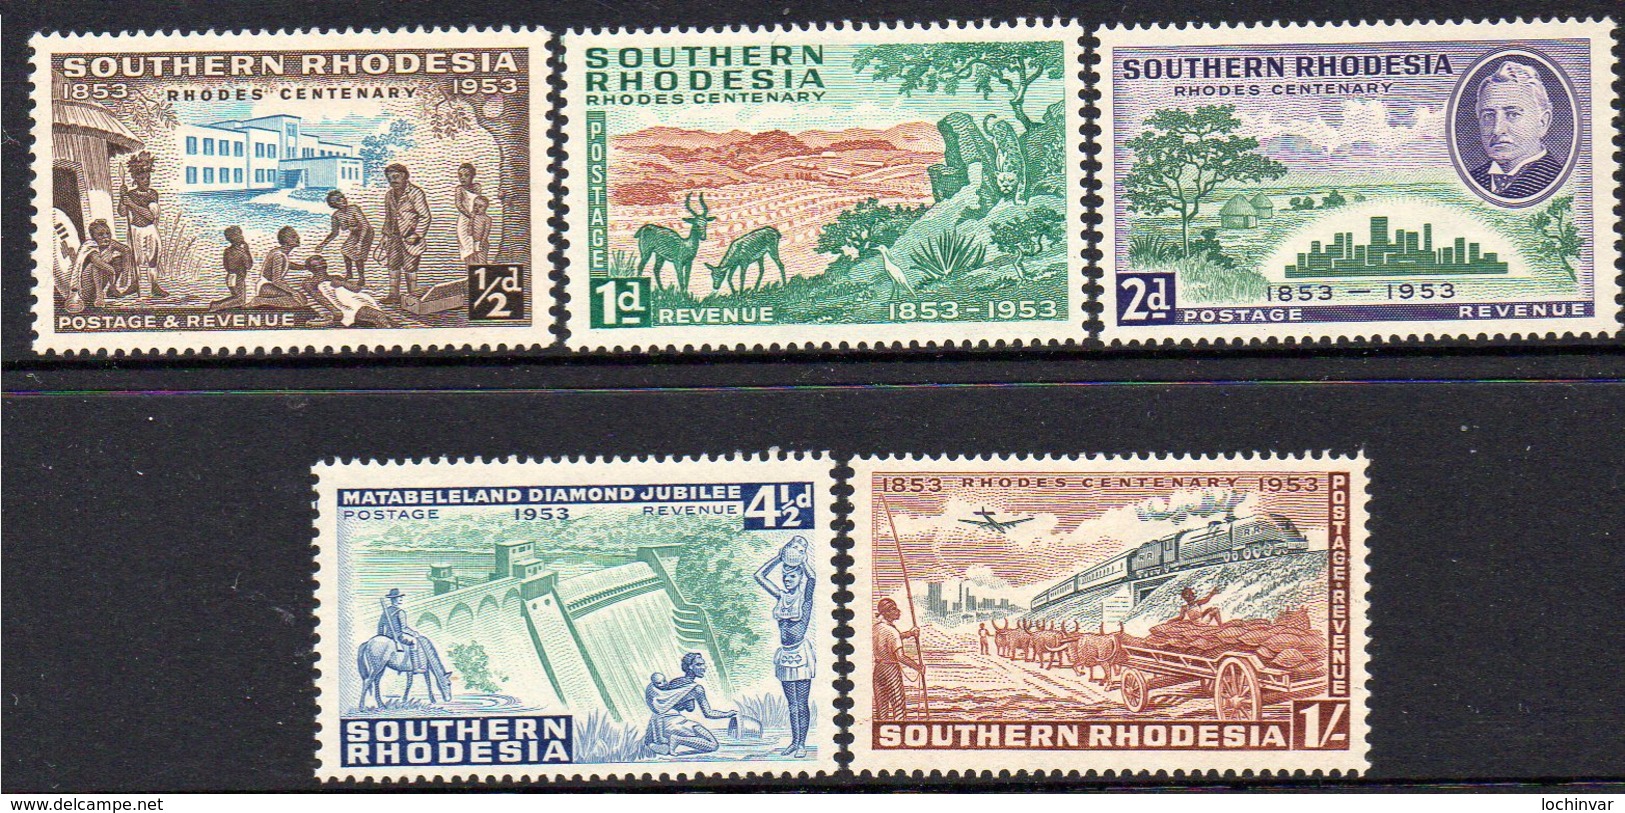 SOUTHERN RHODESIA, 1953 RHODES CENTENARY 5 MH - Africa (Other)